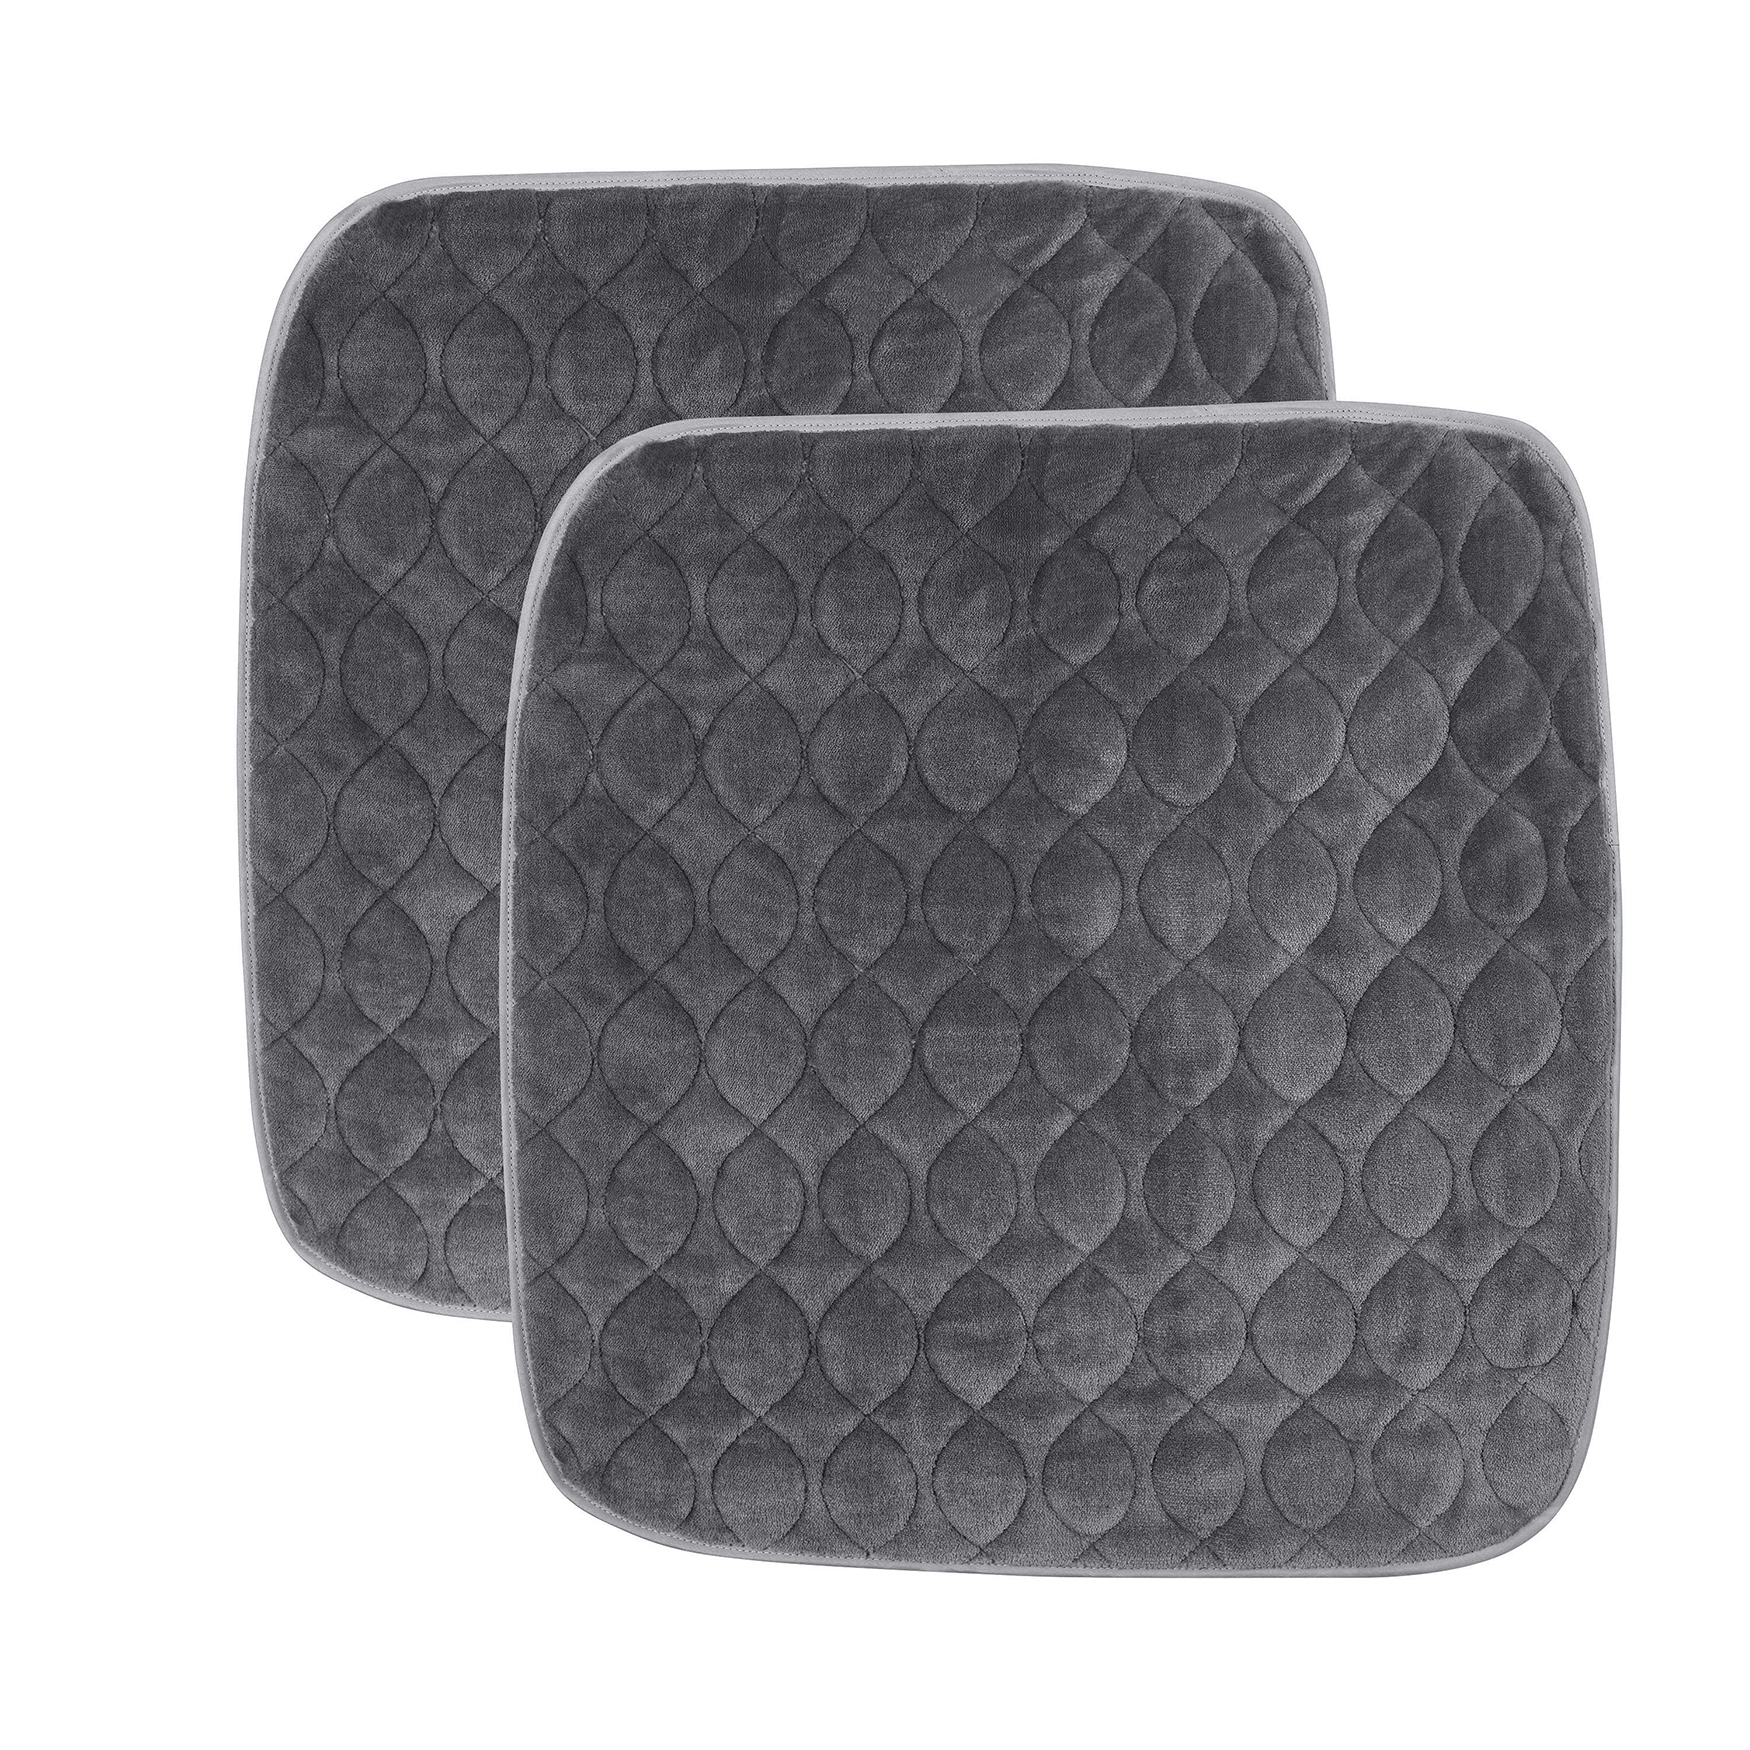 Fresh Ideas Waterproof & Washable Seat Protector 2-Pack with Antimicrobial UltraFresh, Grey, 